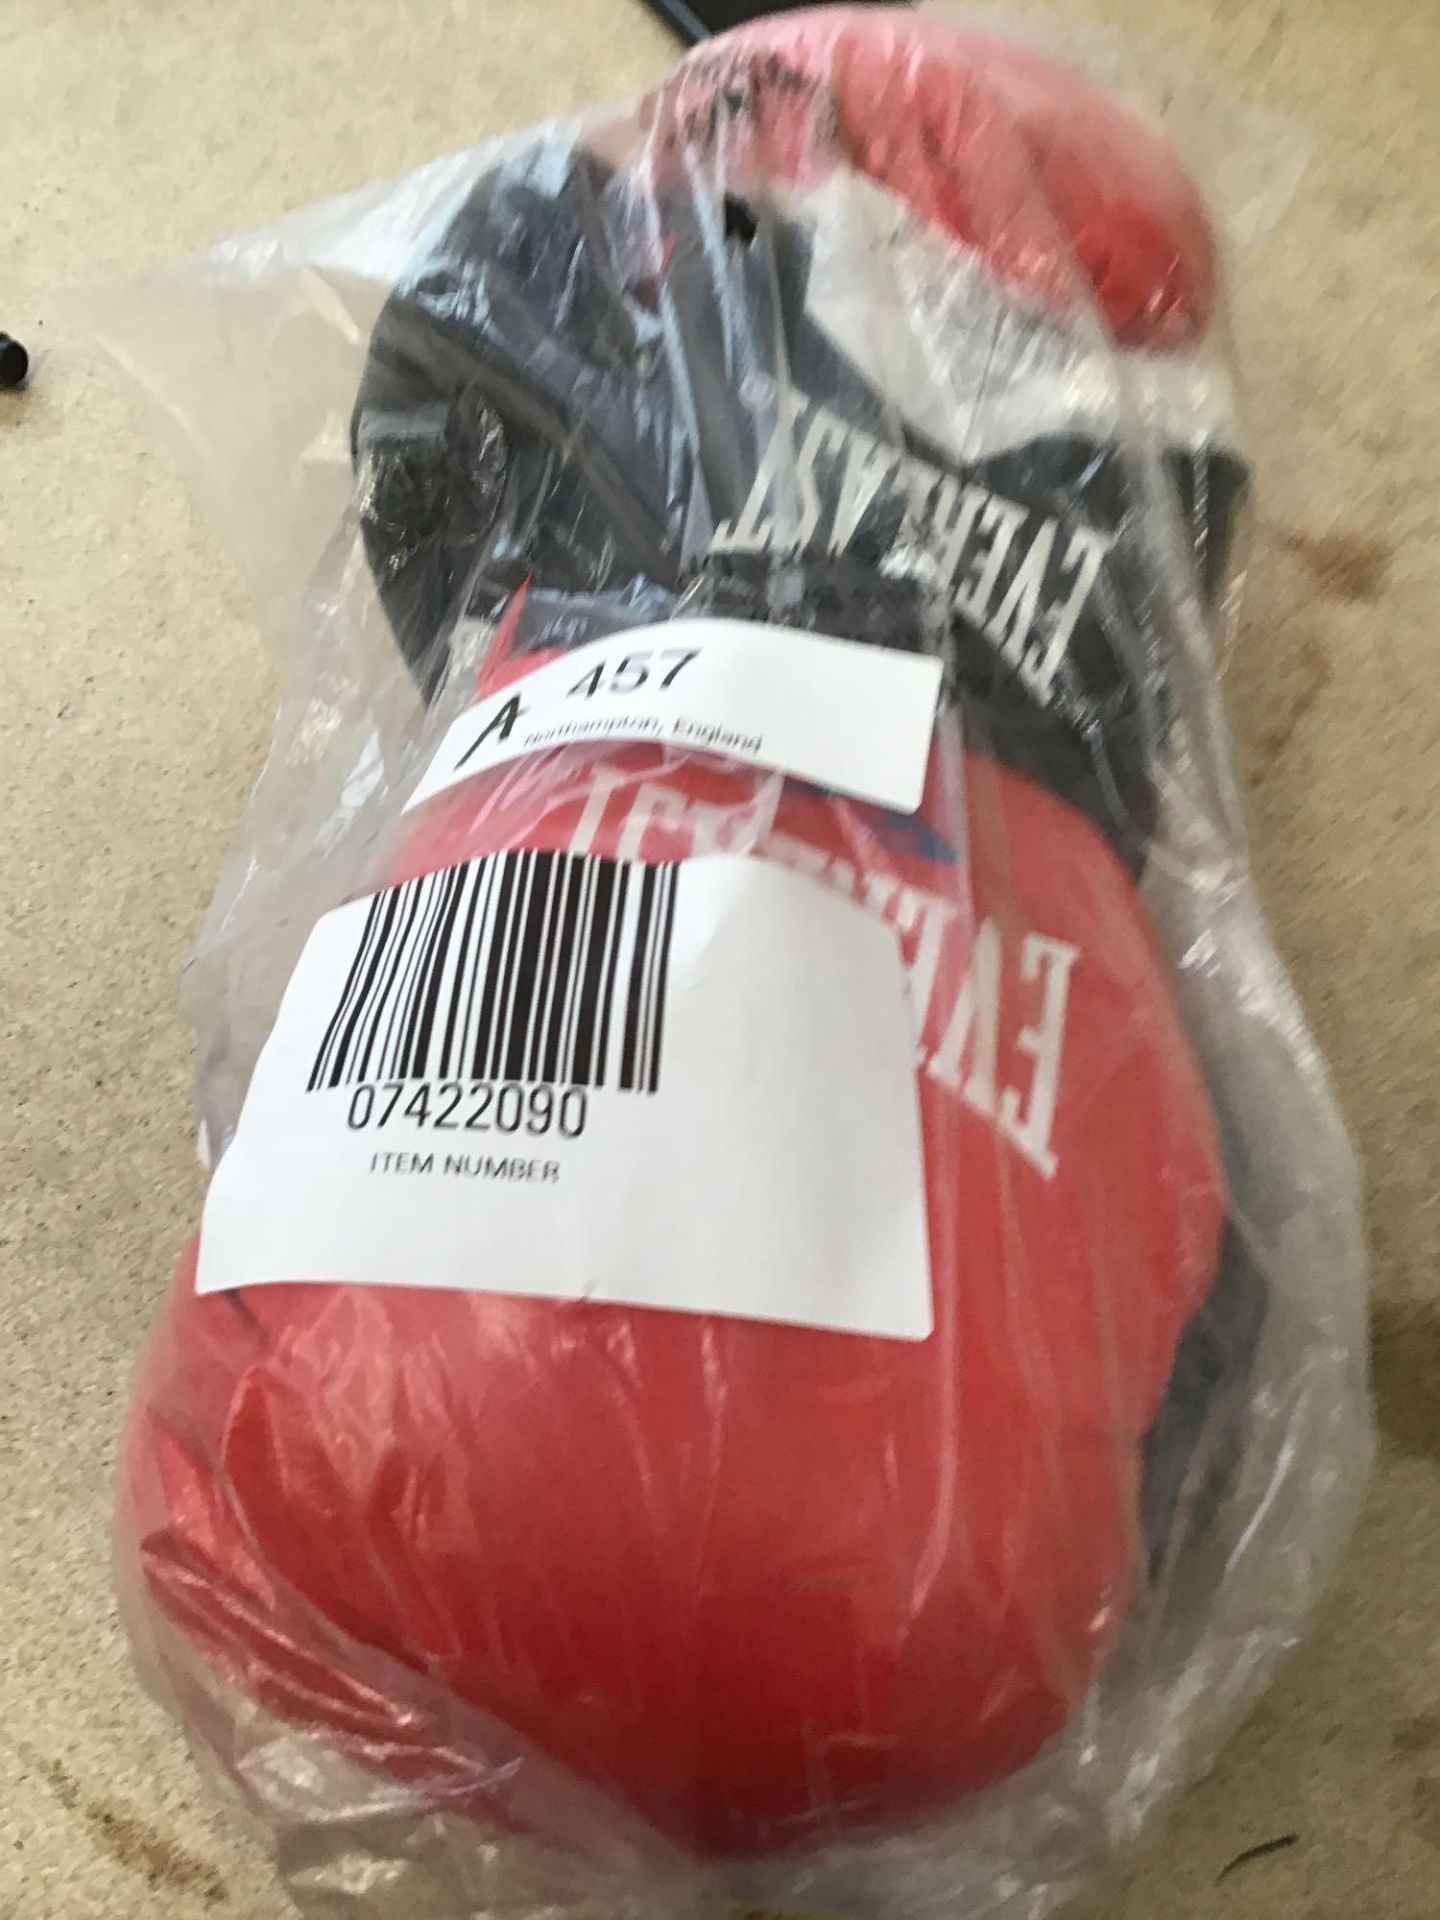 Everlast 14oz Leather Boxing Gloves, £29.99 RRP - Image 4 of 6